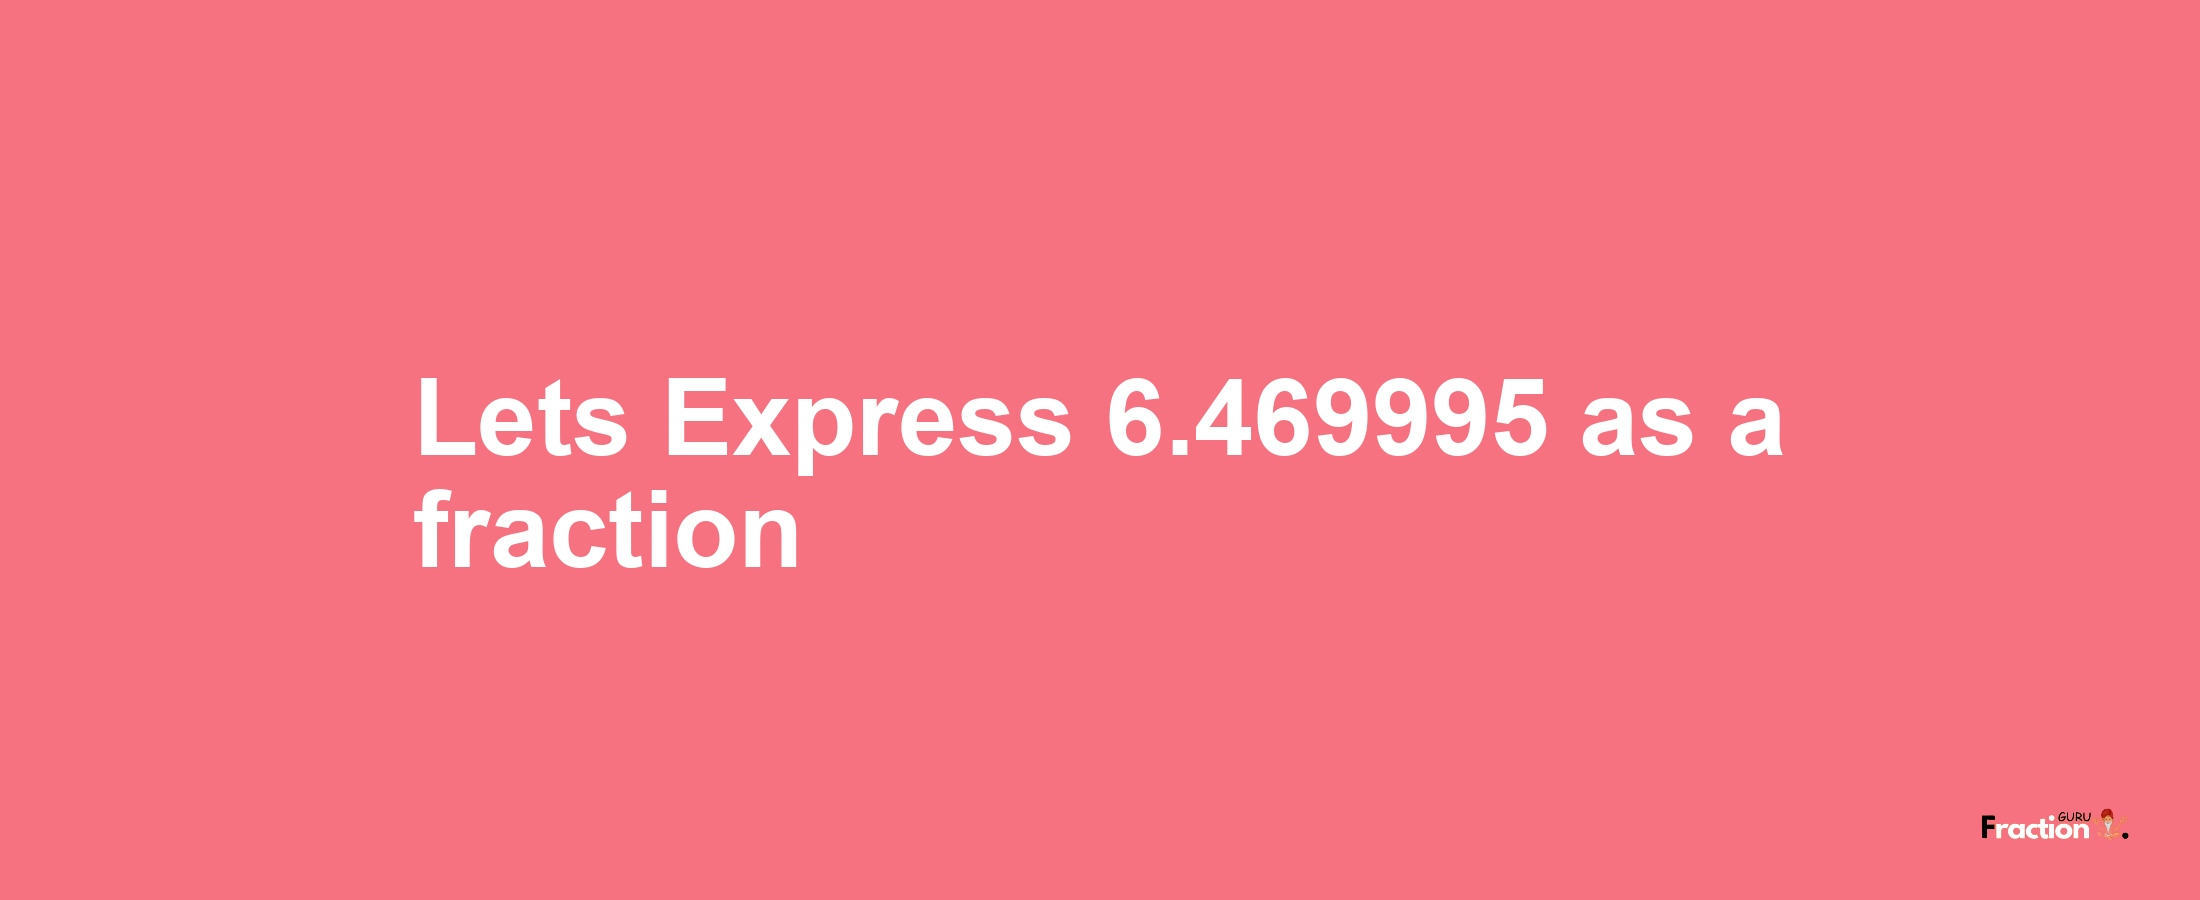 Lets Express 6.469995 as afraction